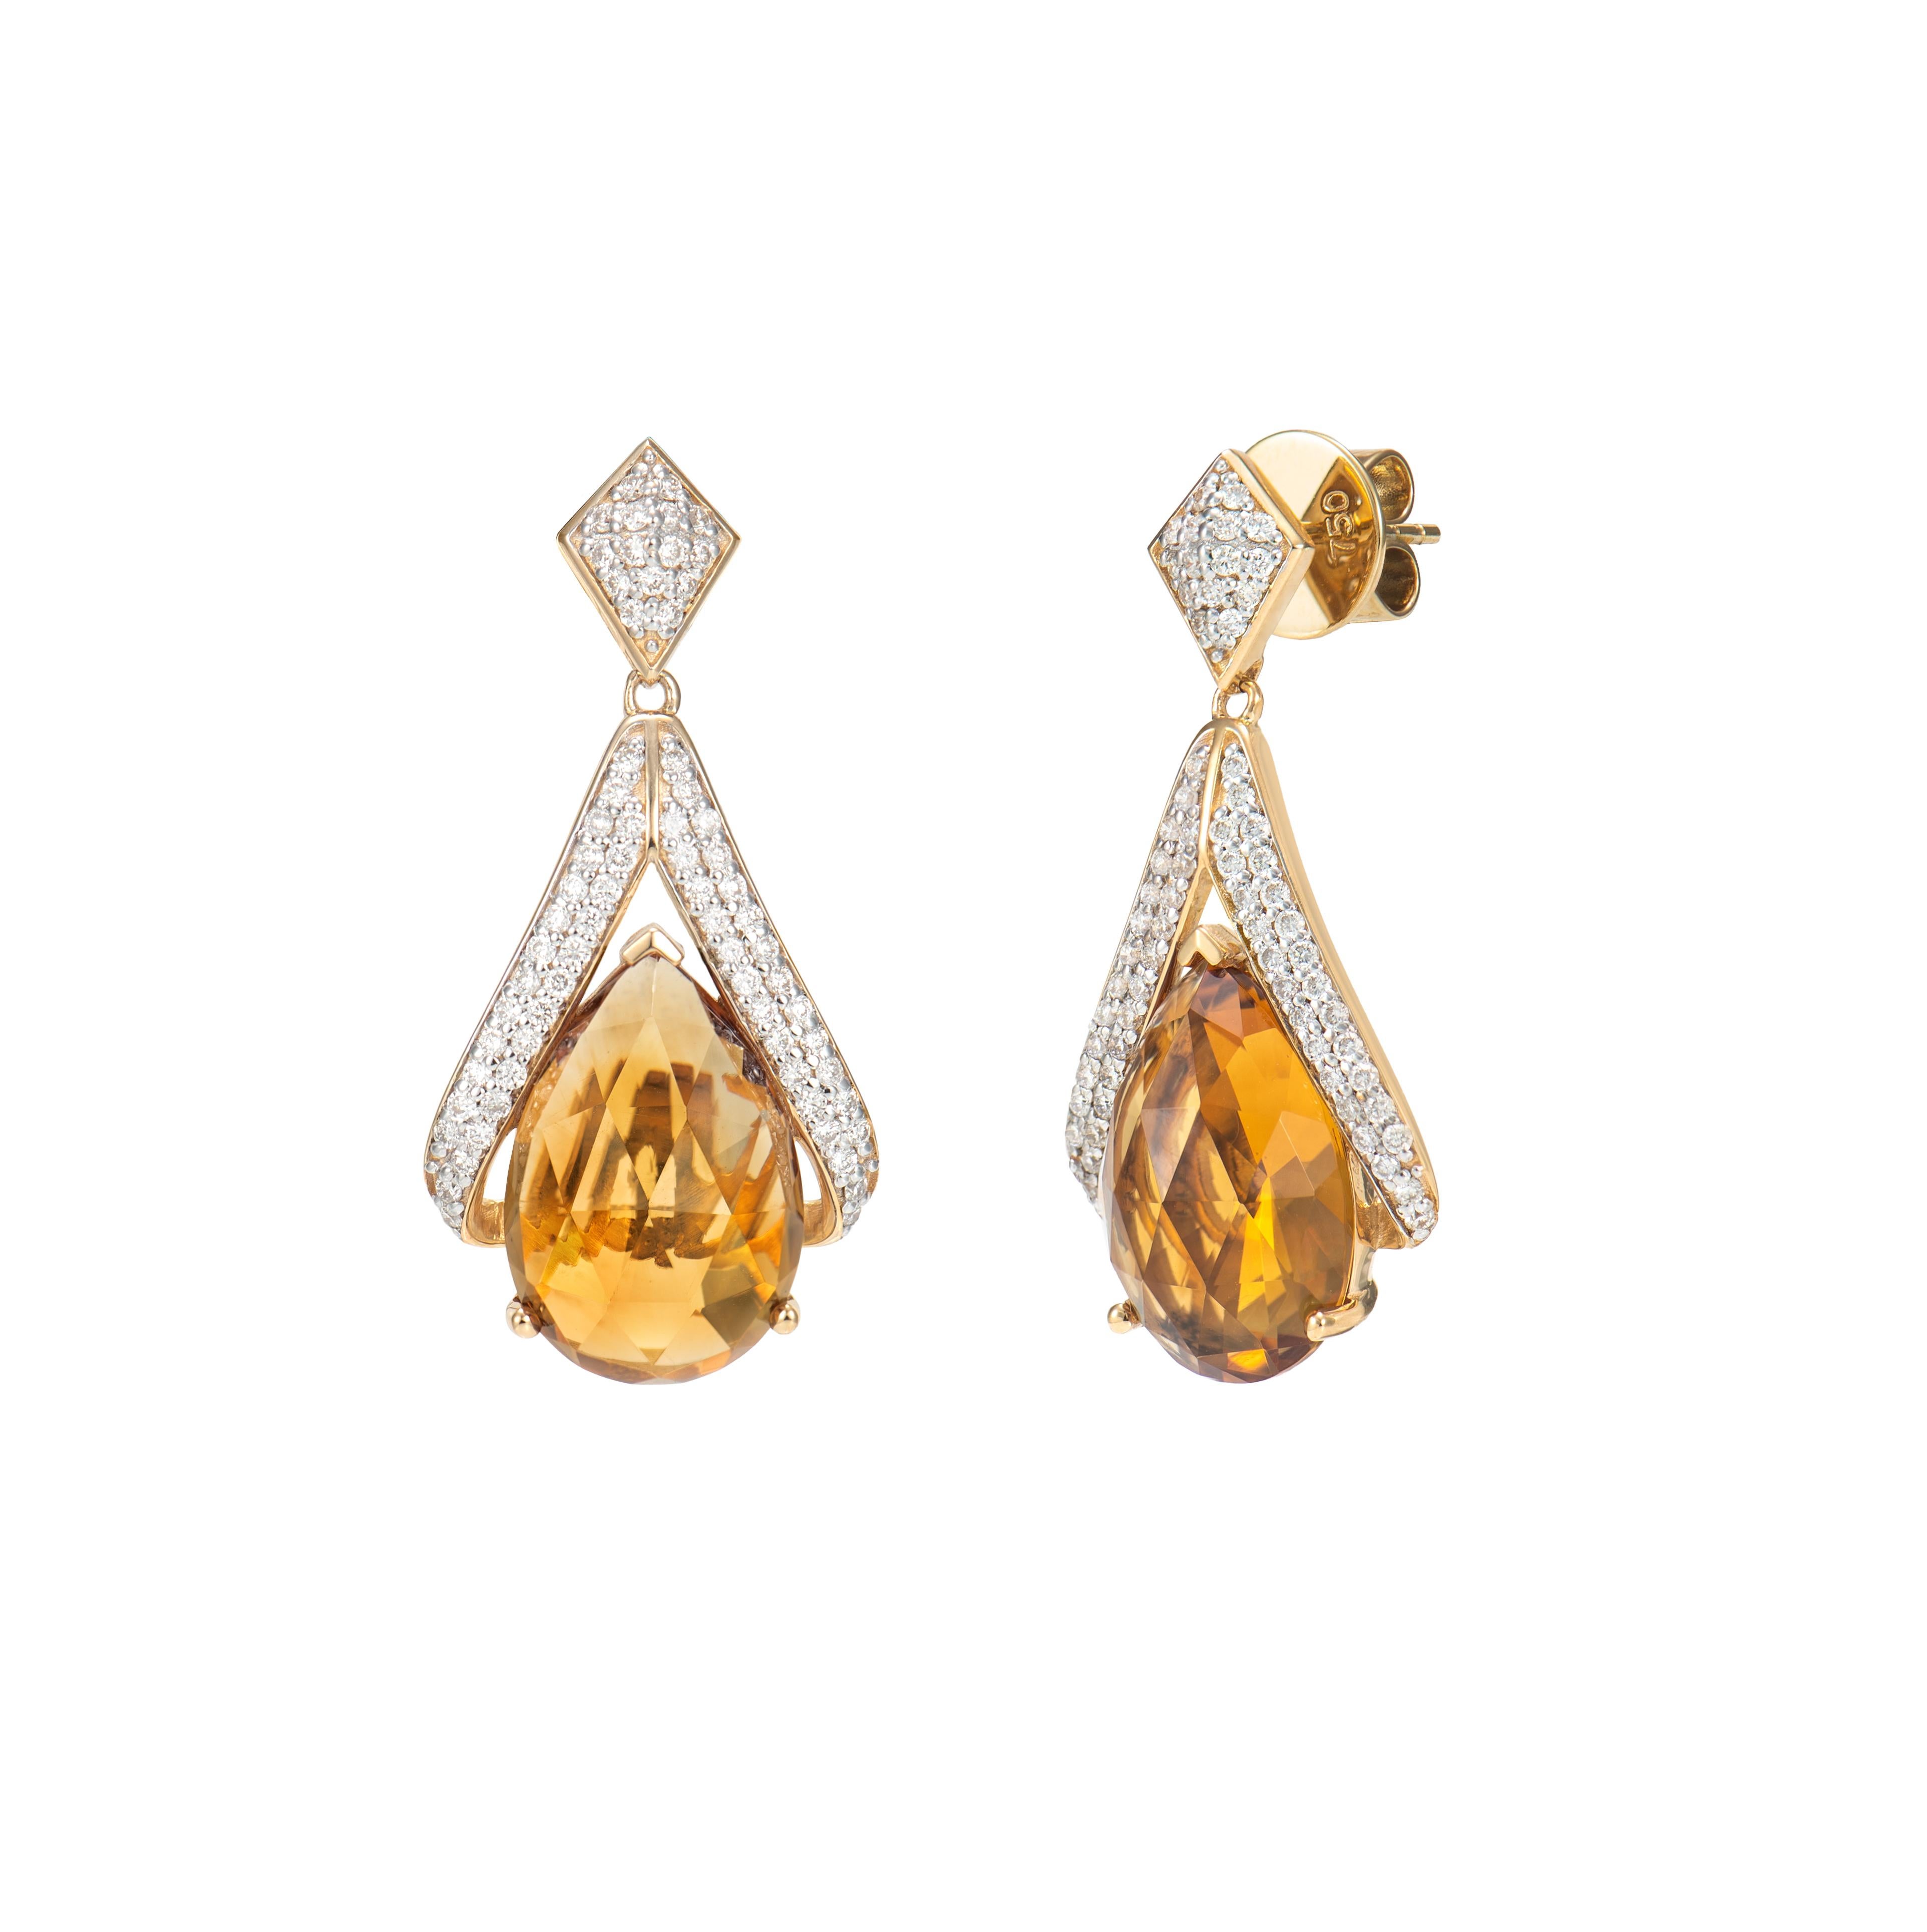 Contemporary Citrine Drop Earring in 18 Karat Yellow Gold with White Diamond.